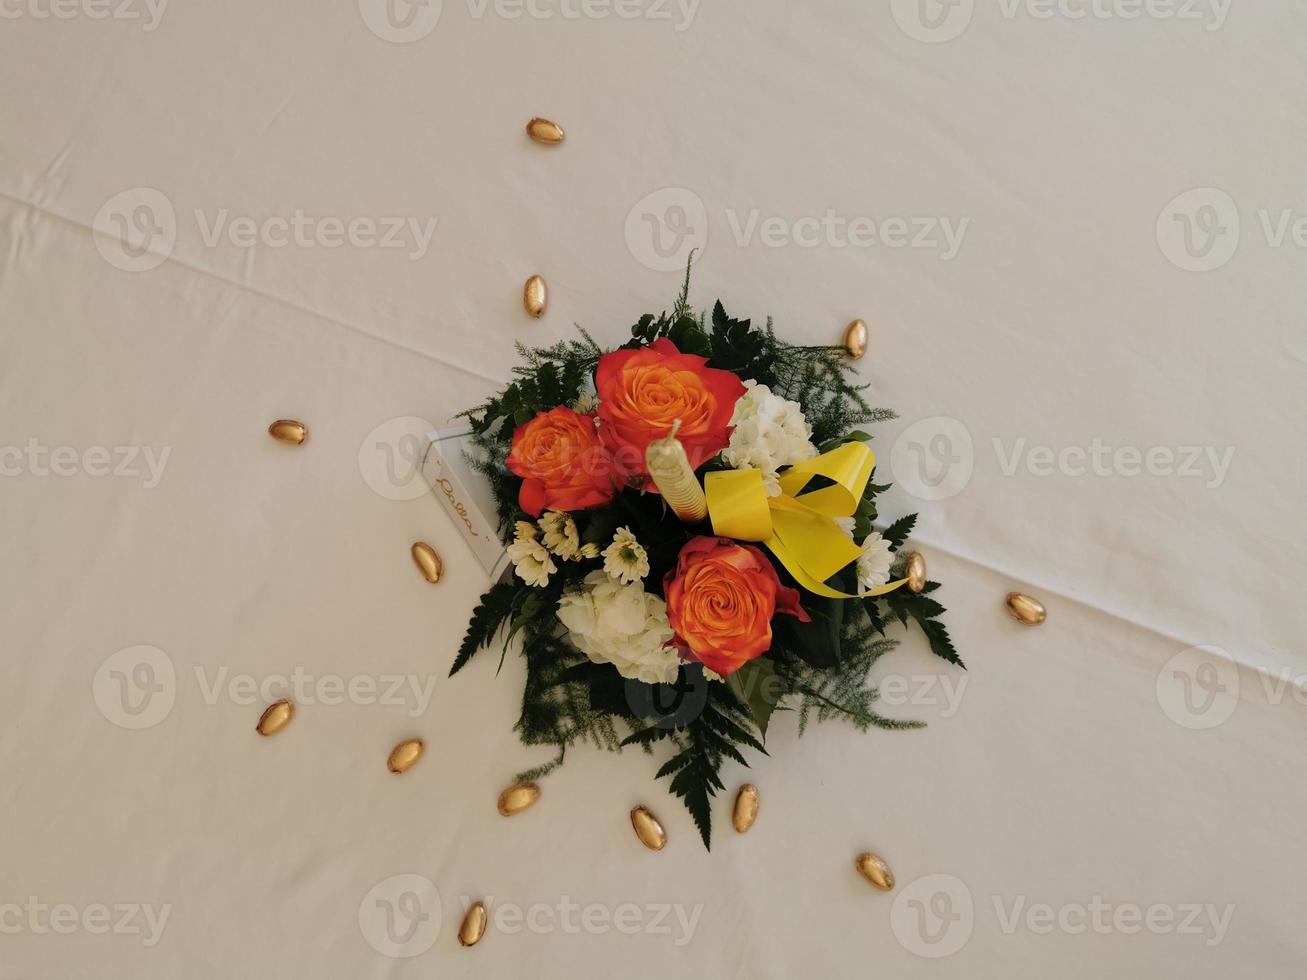 wedding bouqet on a table decoration photo